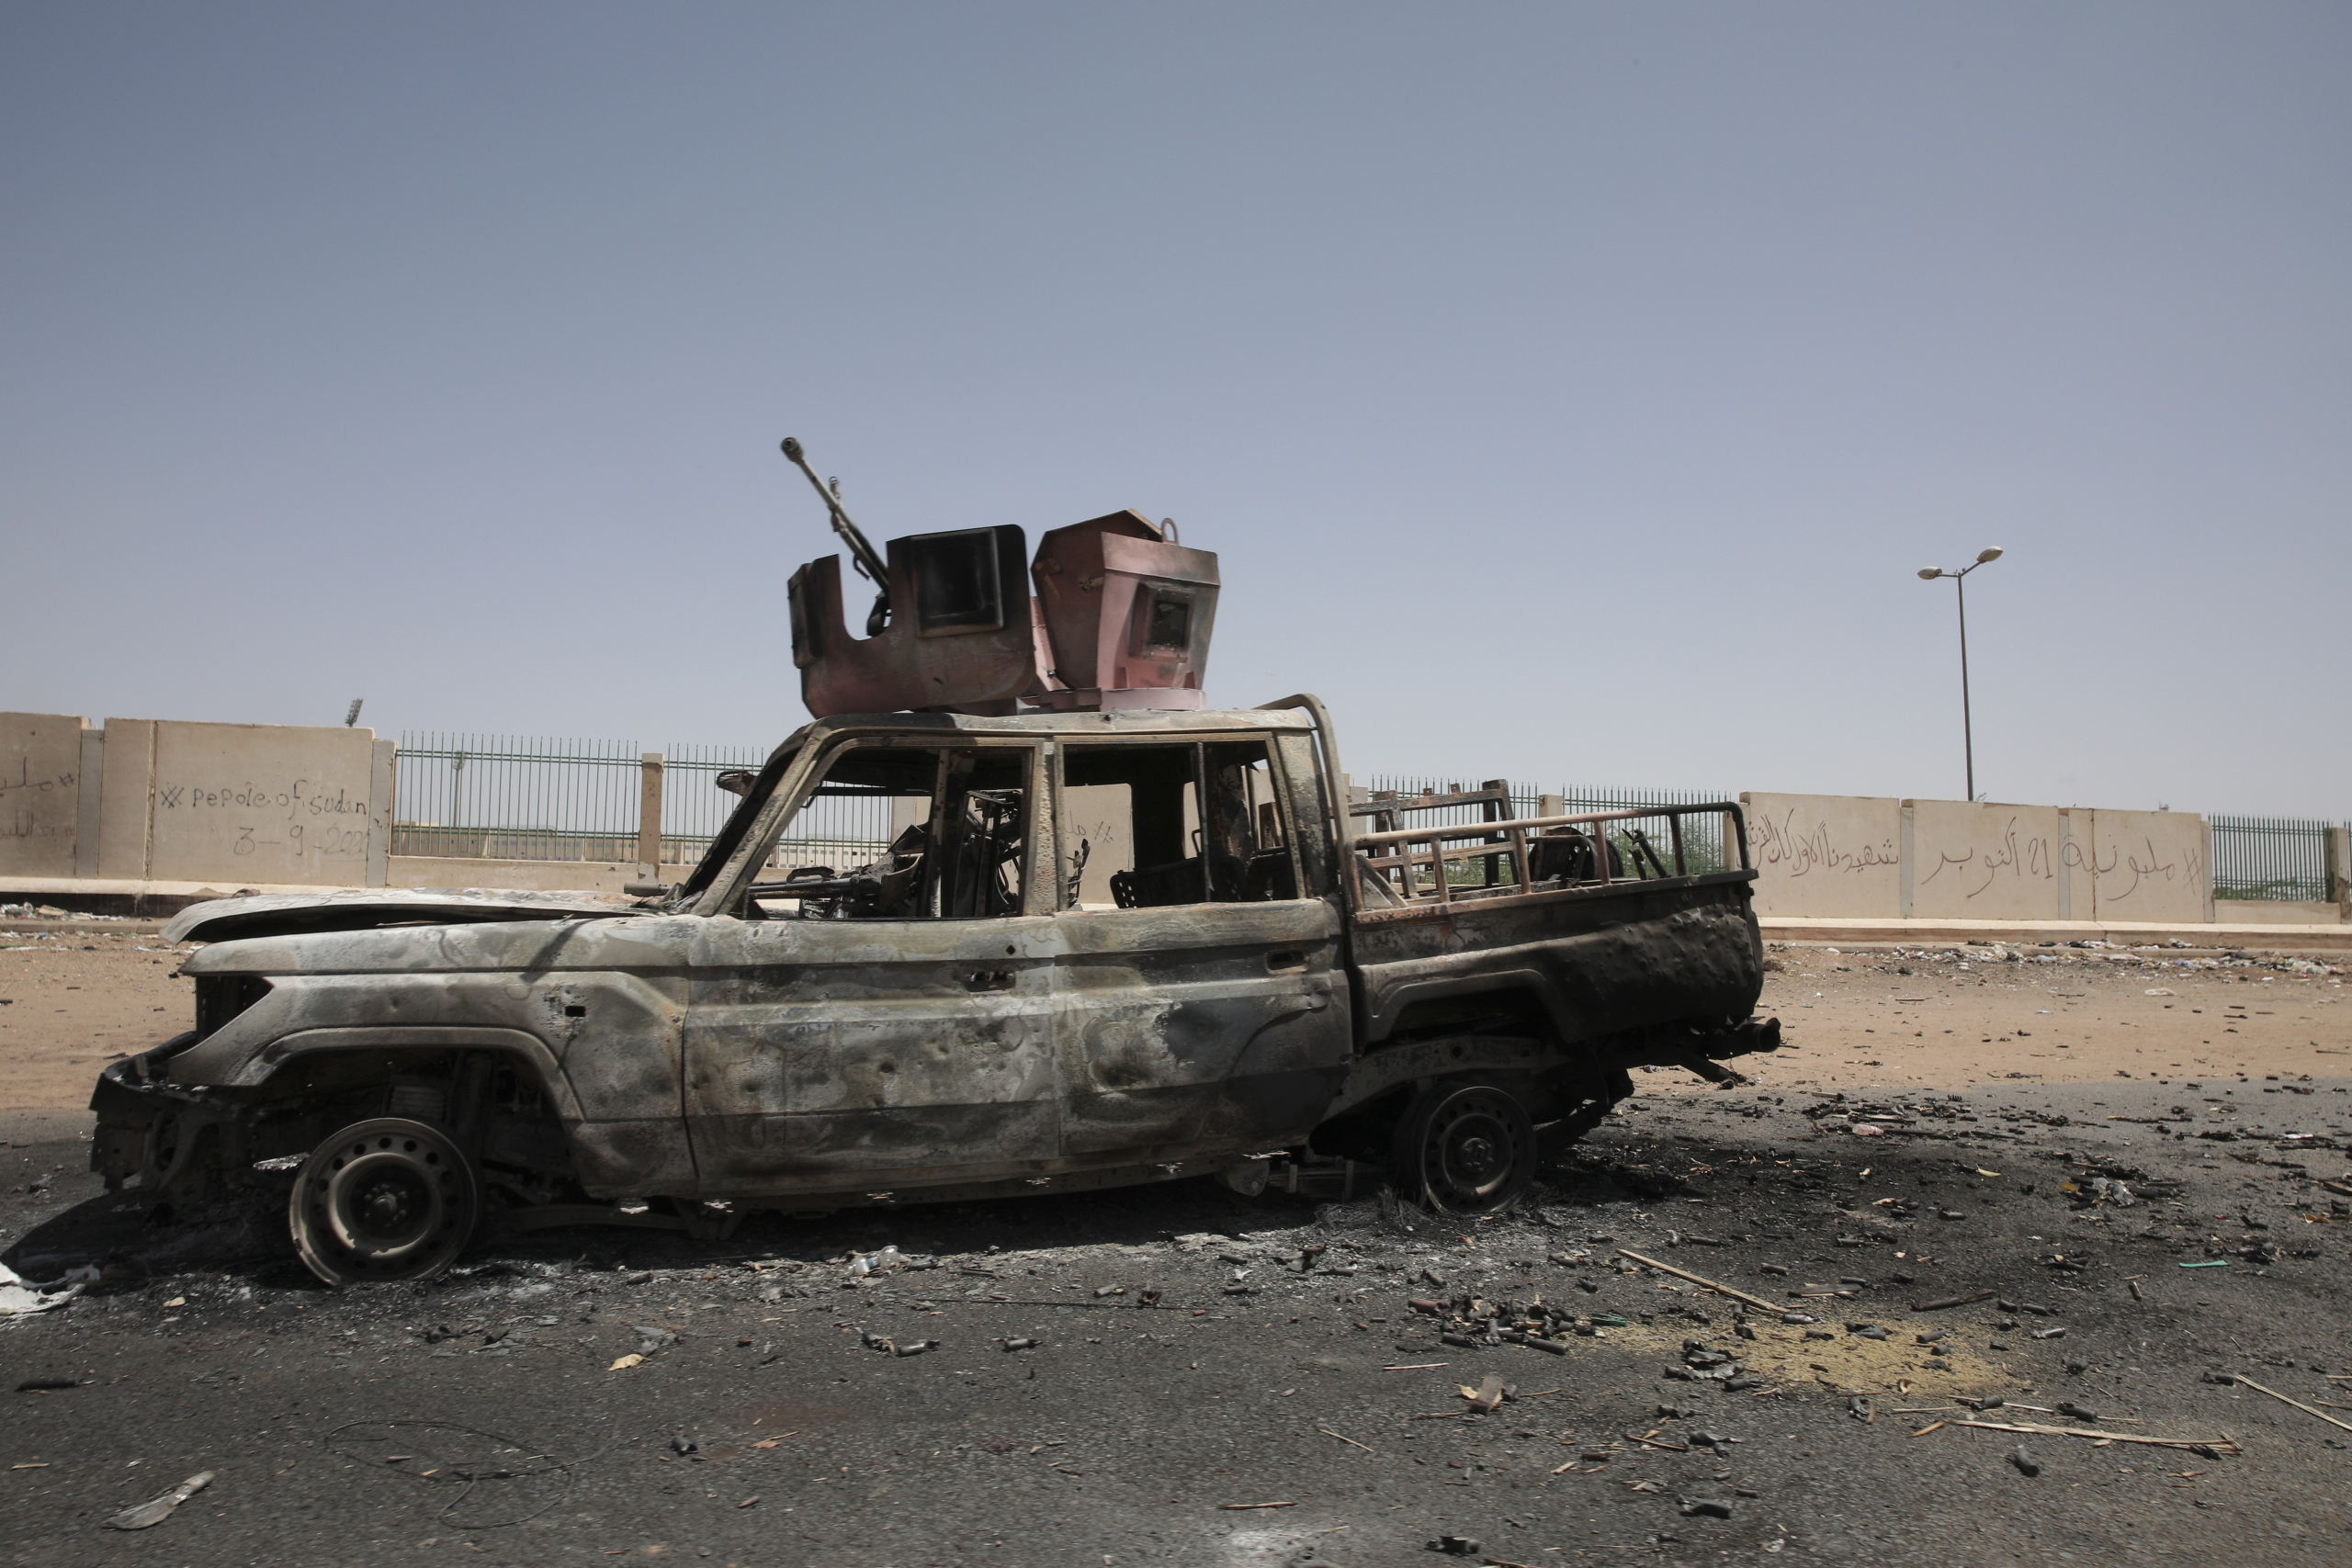 A destroyed military vehicle is seen in southern in Khartoum, Sudan, on April 20, 2023. The latest attempt at a cease-fire between the rival Sudanese forces faltered as gunfire rattled the capital of Khartoum. Through the night and into the next morning, gunfire could be heard almost constantly across Khartoum. (AP Photo/Marwan Ali)

Associated Press/LaPresse
Only Italy and Spain